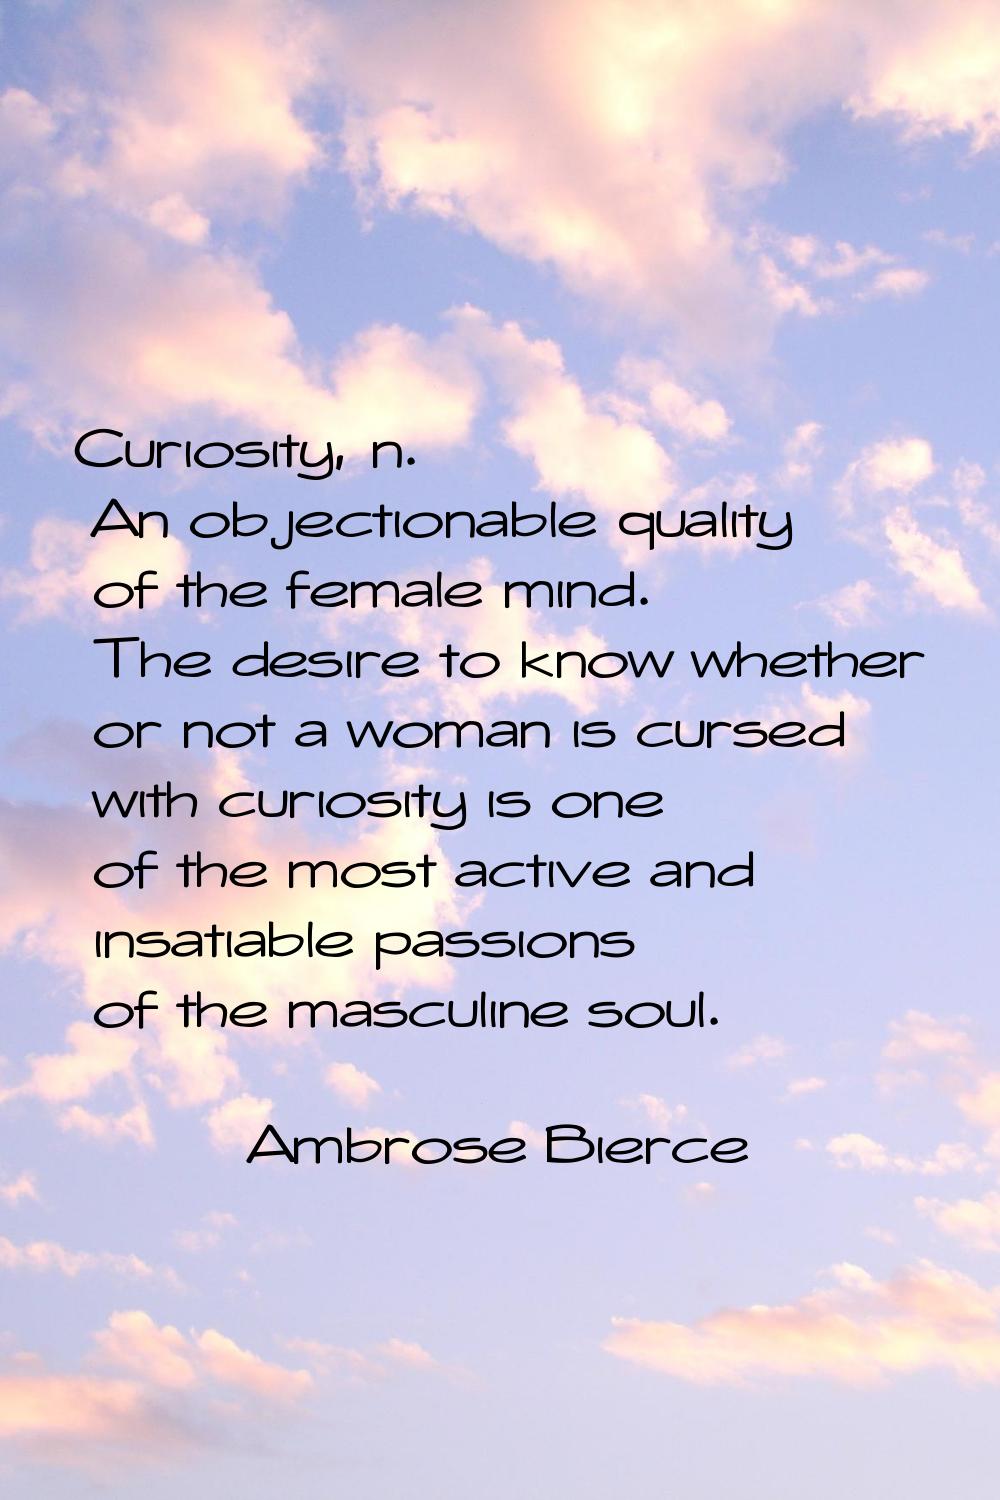 Curiosity, n. An objectionable quality of the female mind. The desire to know whether or not a woma